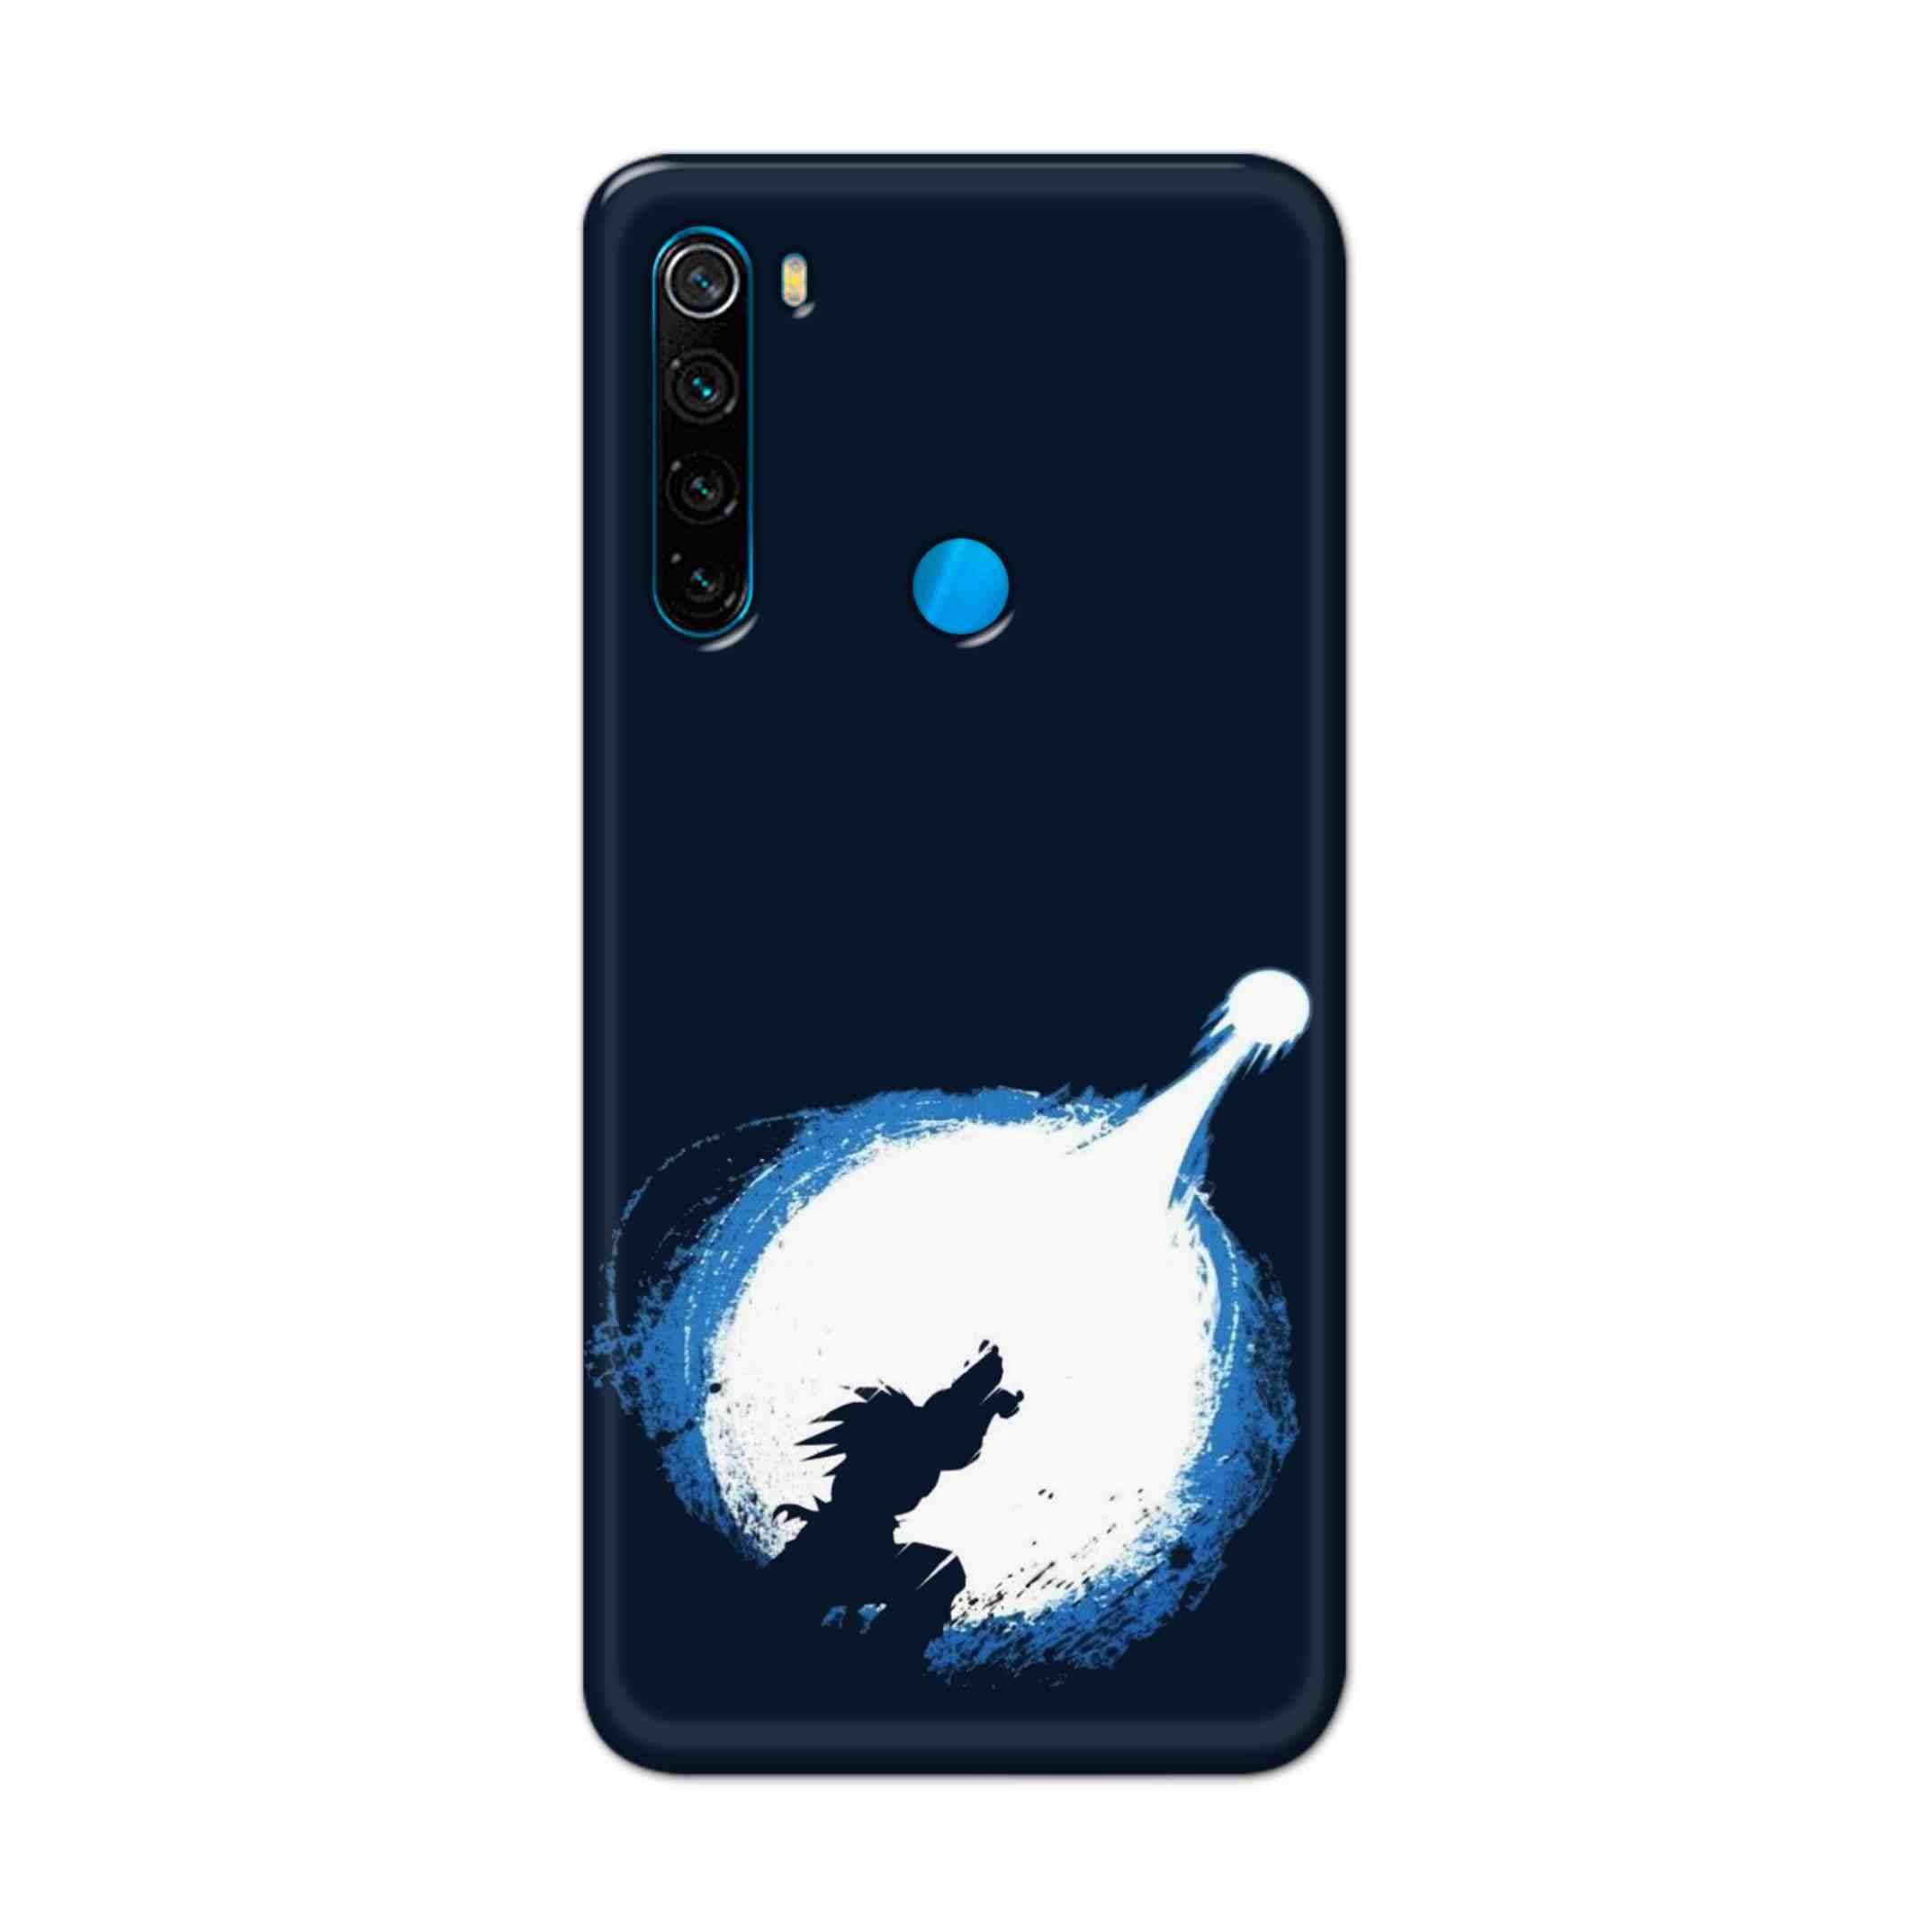 Buy Goku Power Hard Back Mobile Phone Case Cover For Xiaomi Redmi Note 8 Online